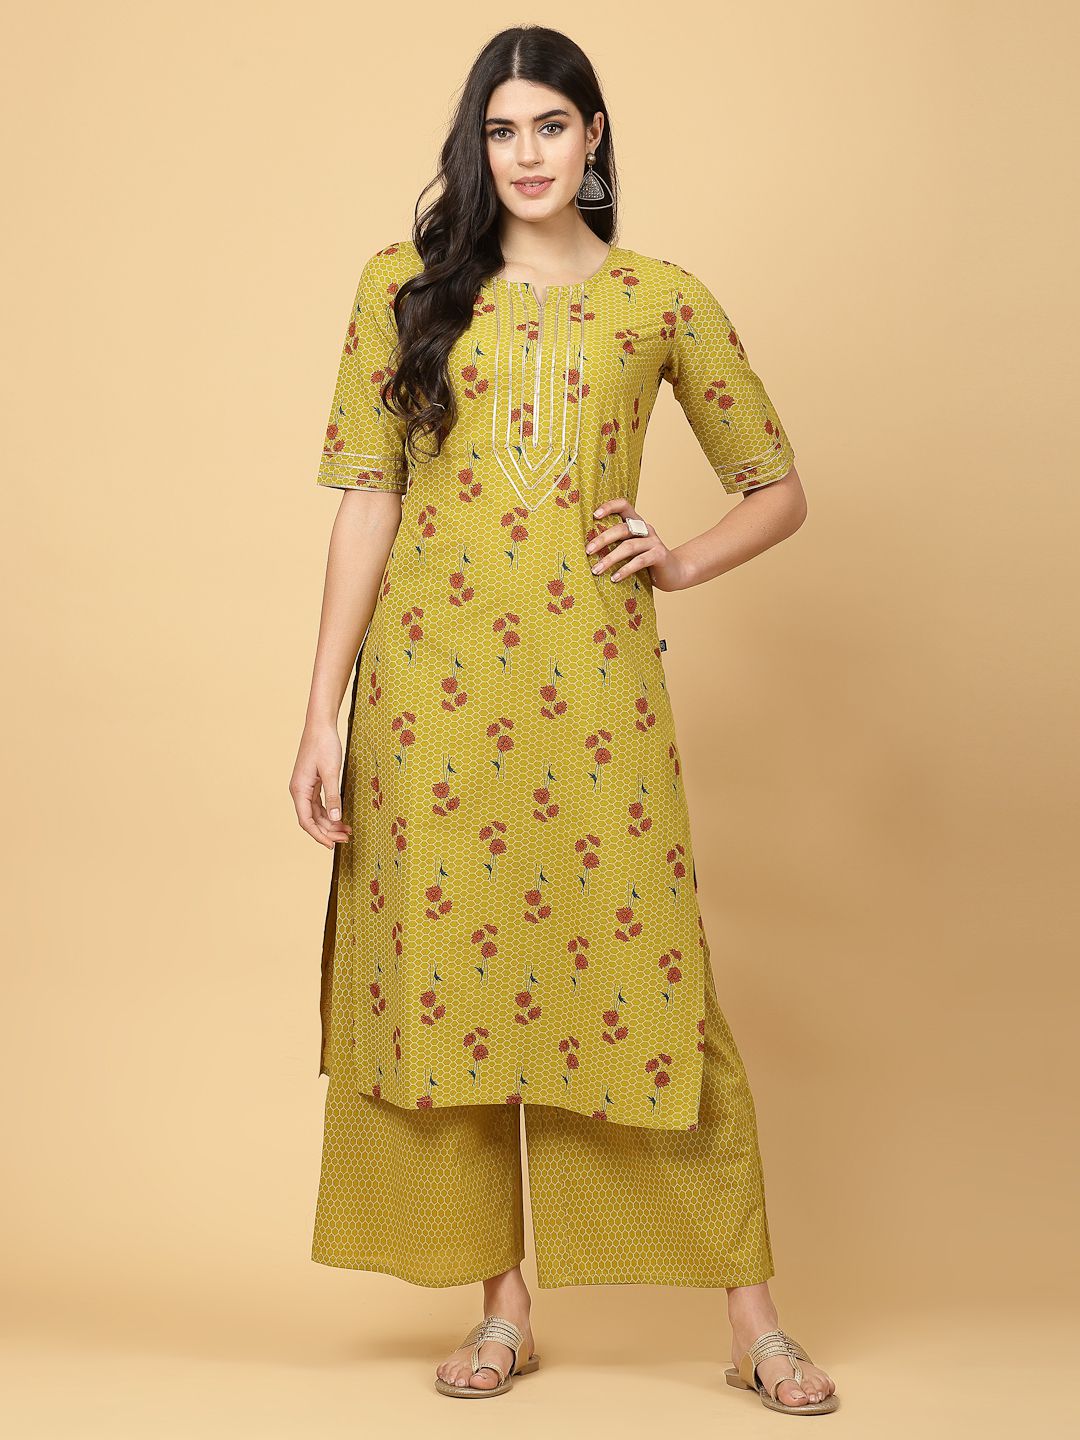     			Pistaa Cotton Printed Kurti With Palazzo Women's Stitched Salwar Suit - Yellow ( Pack of 1 )